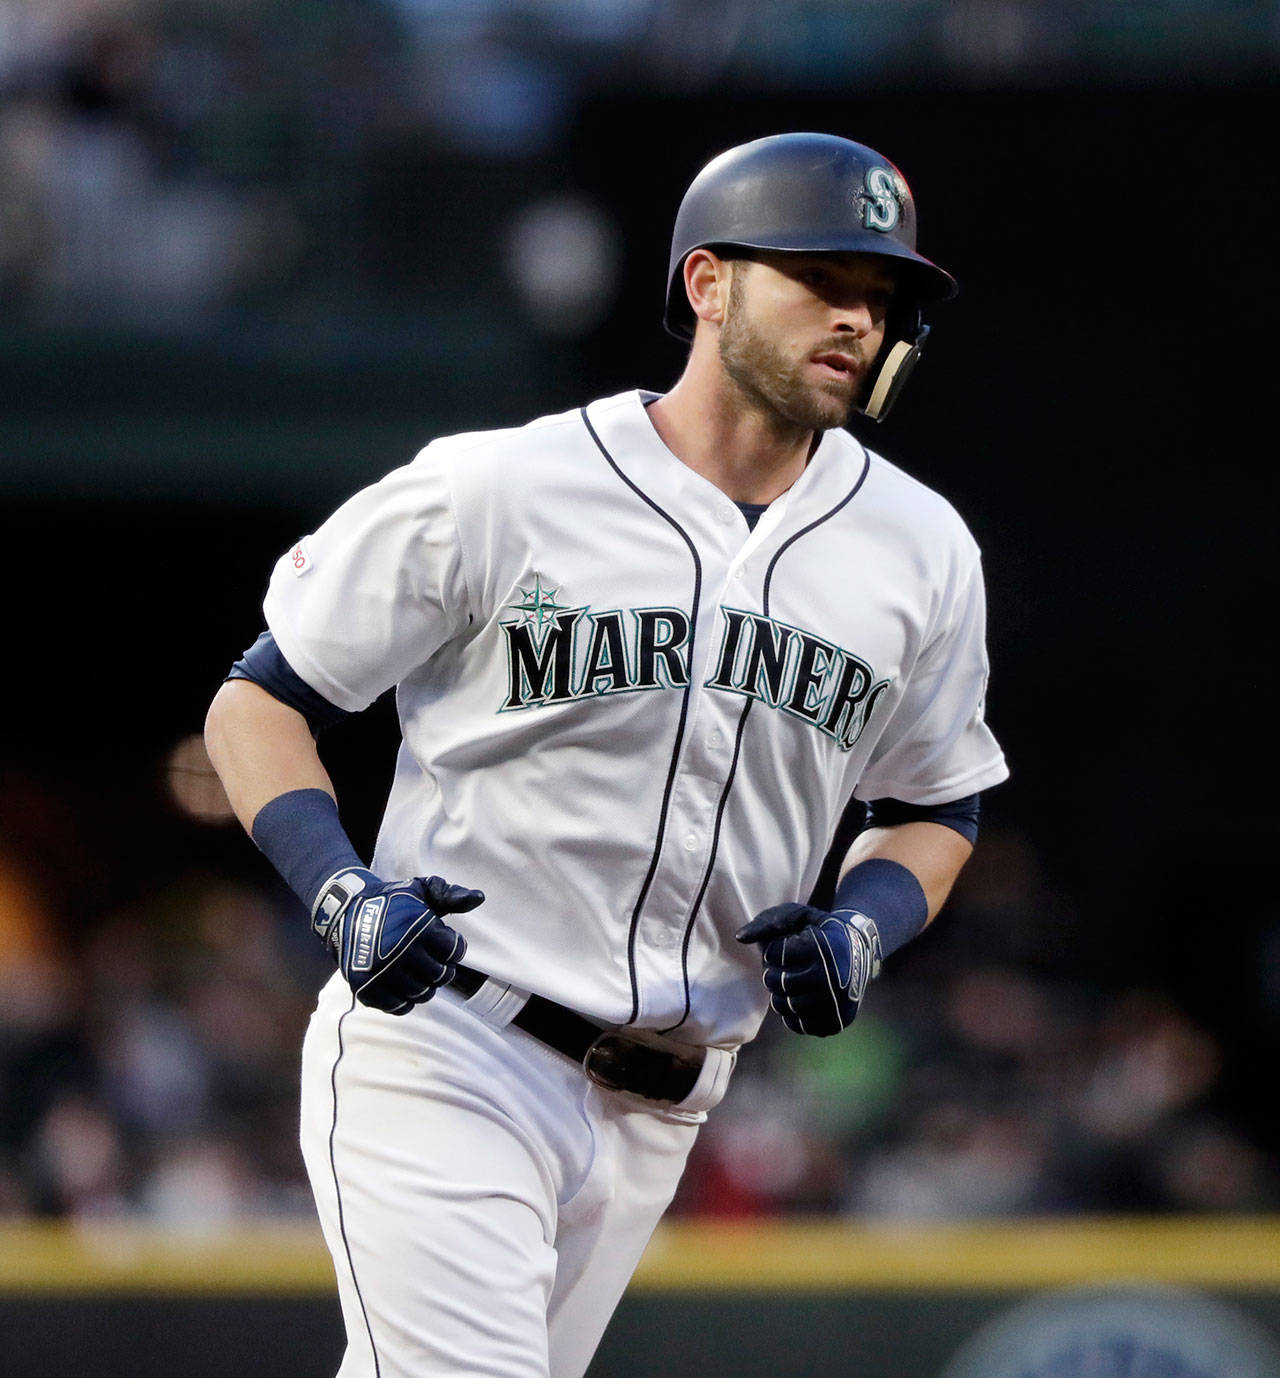 Mariners outfielder Mitch Haniger is likely to miss the start of the 2020 season with a core-muscle injury, the team announced Thursday. (AP Photo/Elaine Thompson)